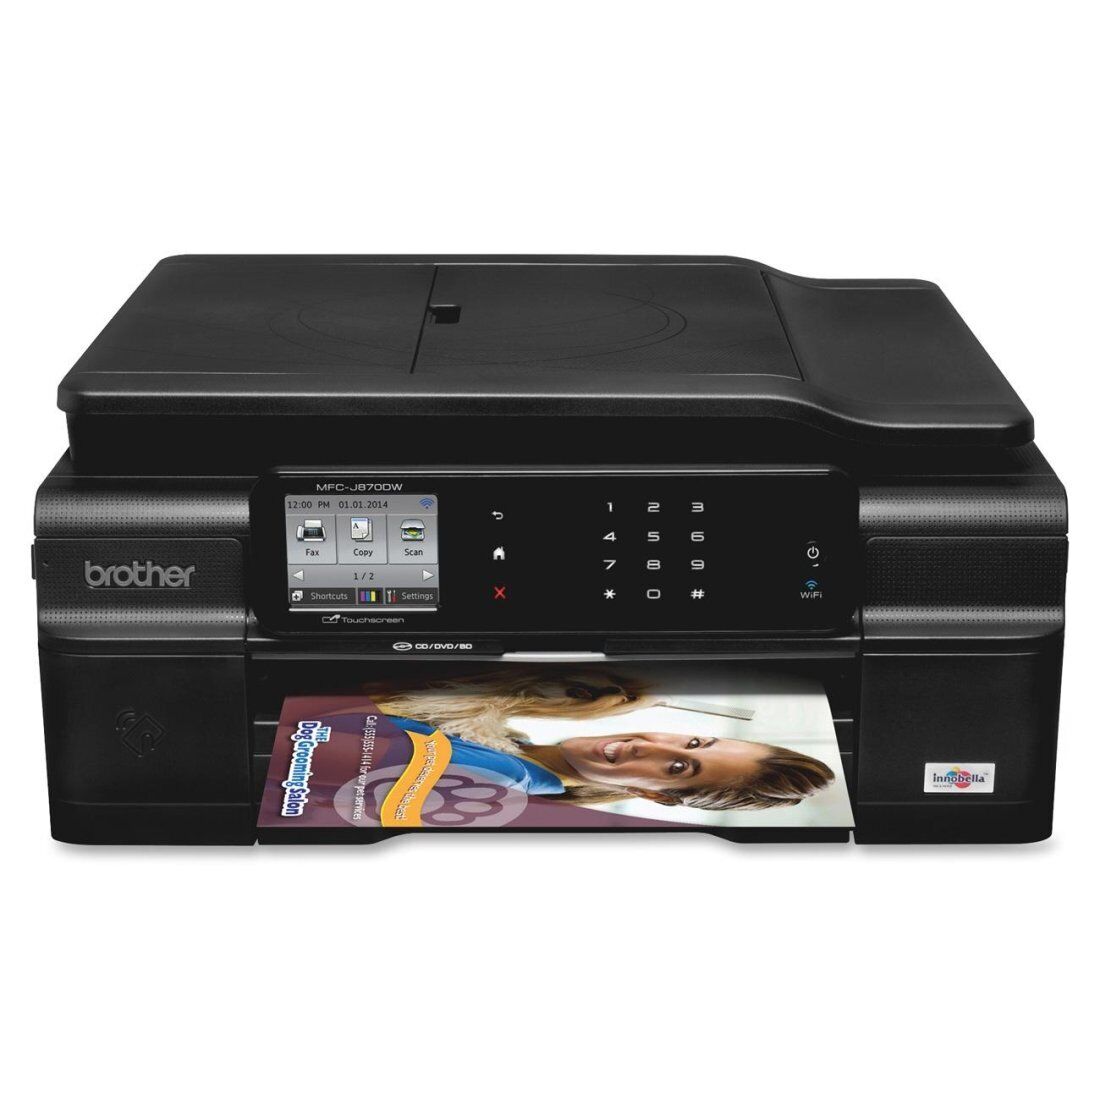 Brother Printer Work Smart Wireless Color Inkjet All-in-One Printer PERFECT COND